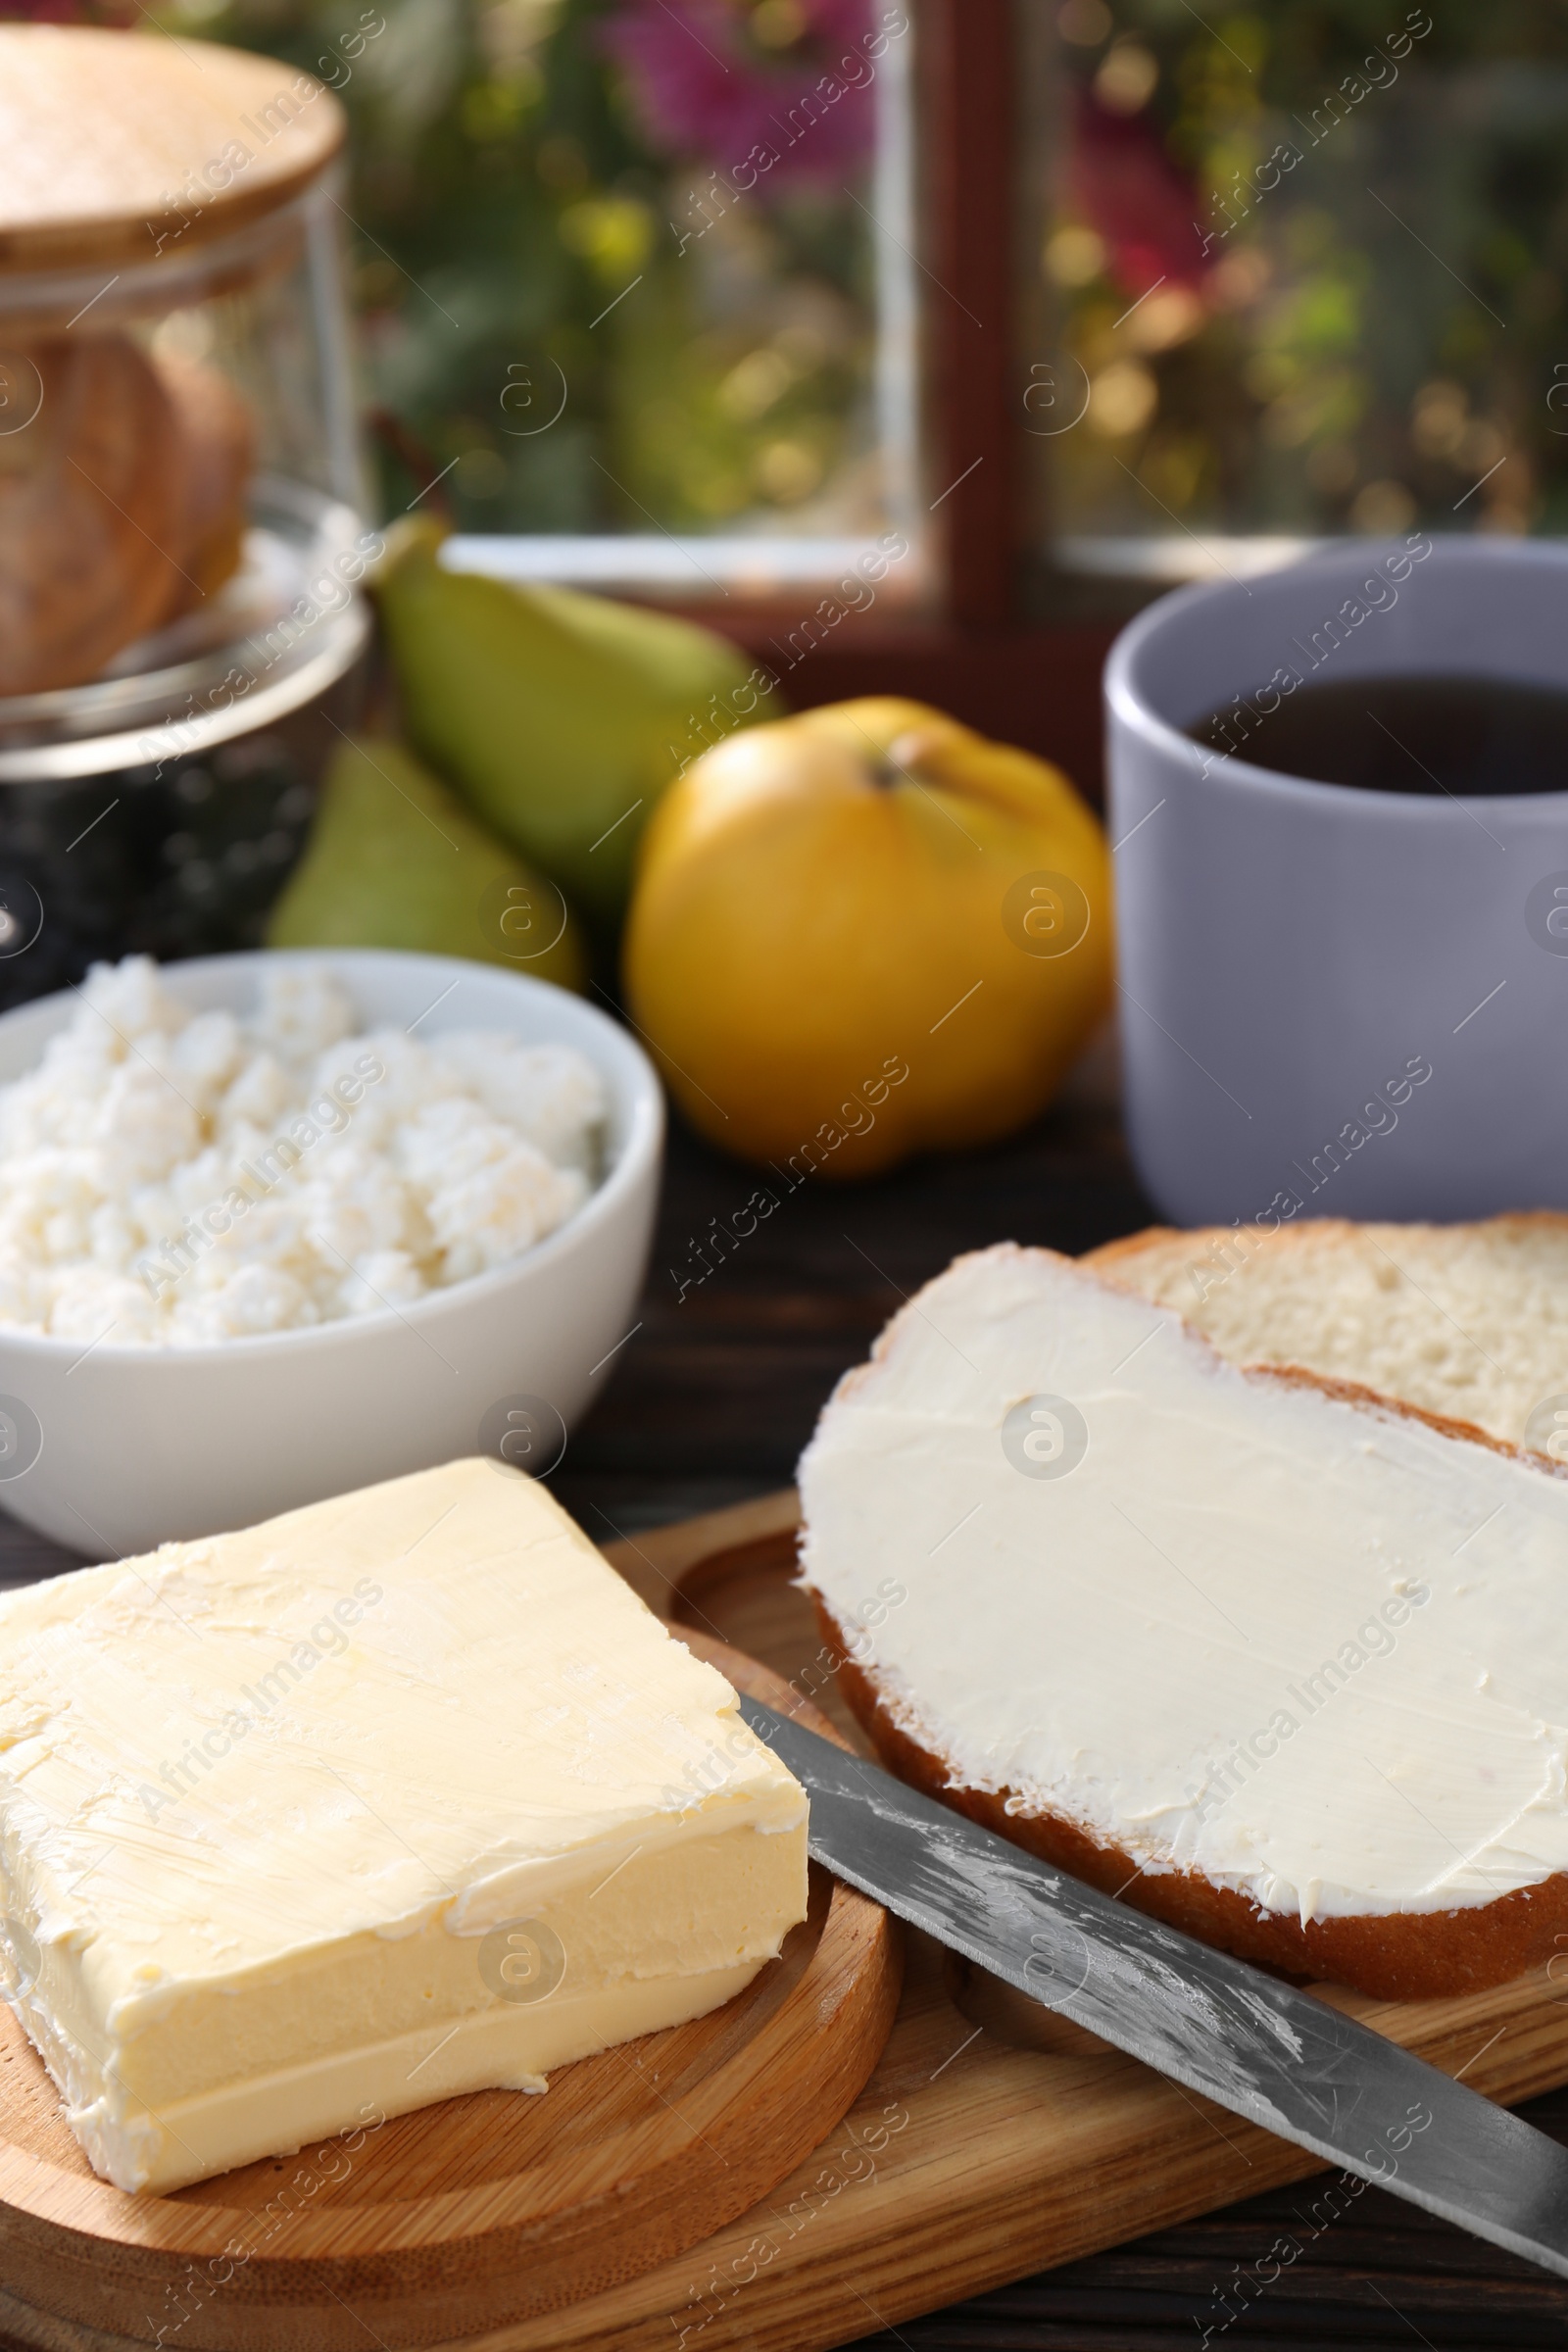 Photo of Tasty homemade butter, bread slices and tea on wooden table, closeup